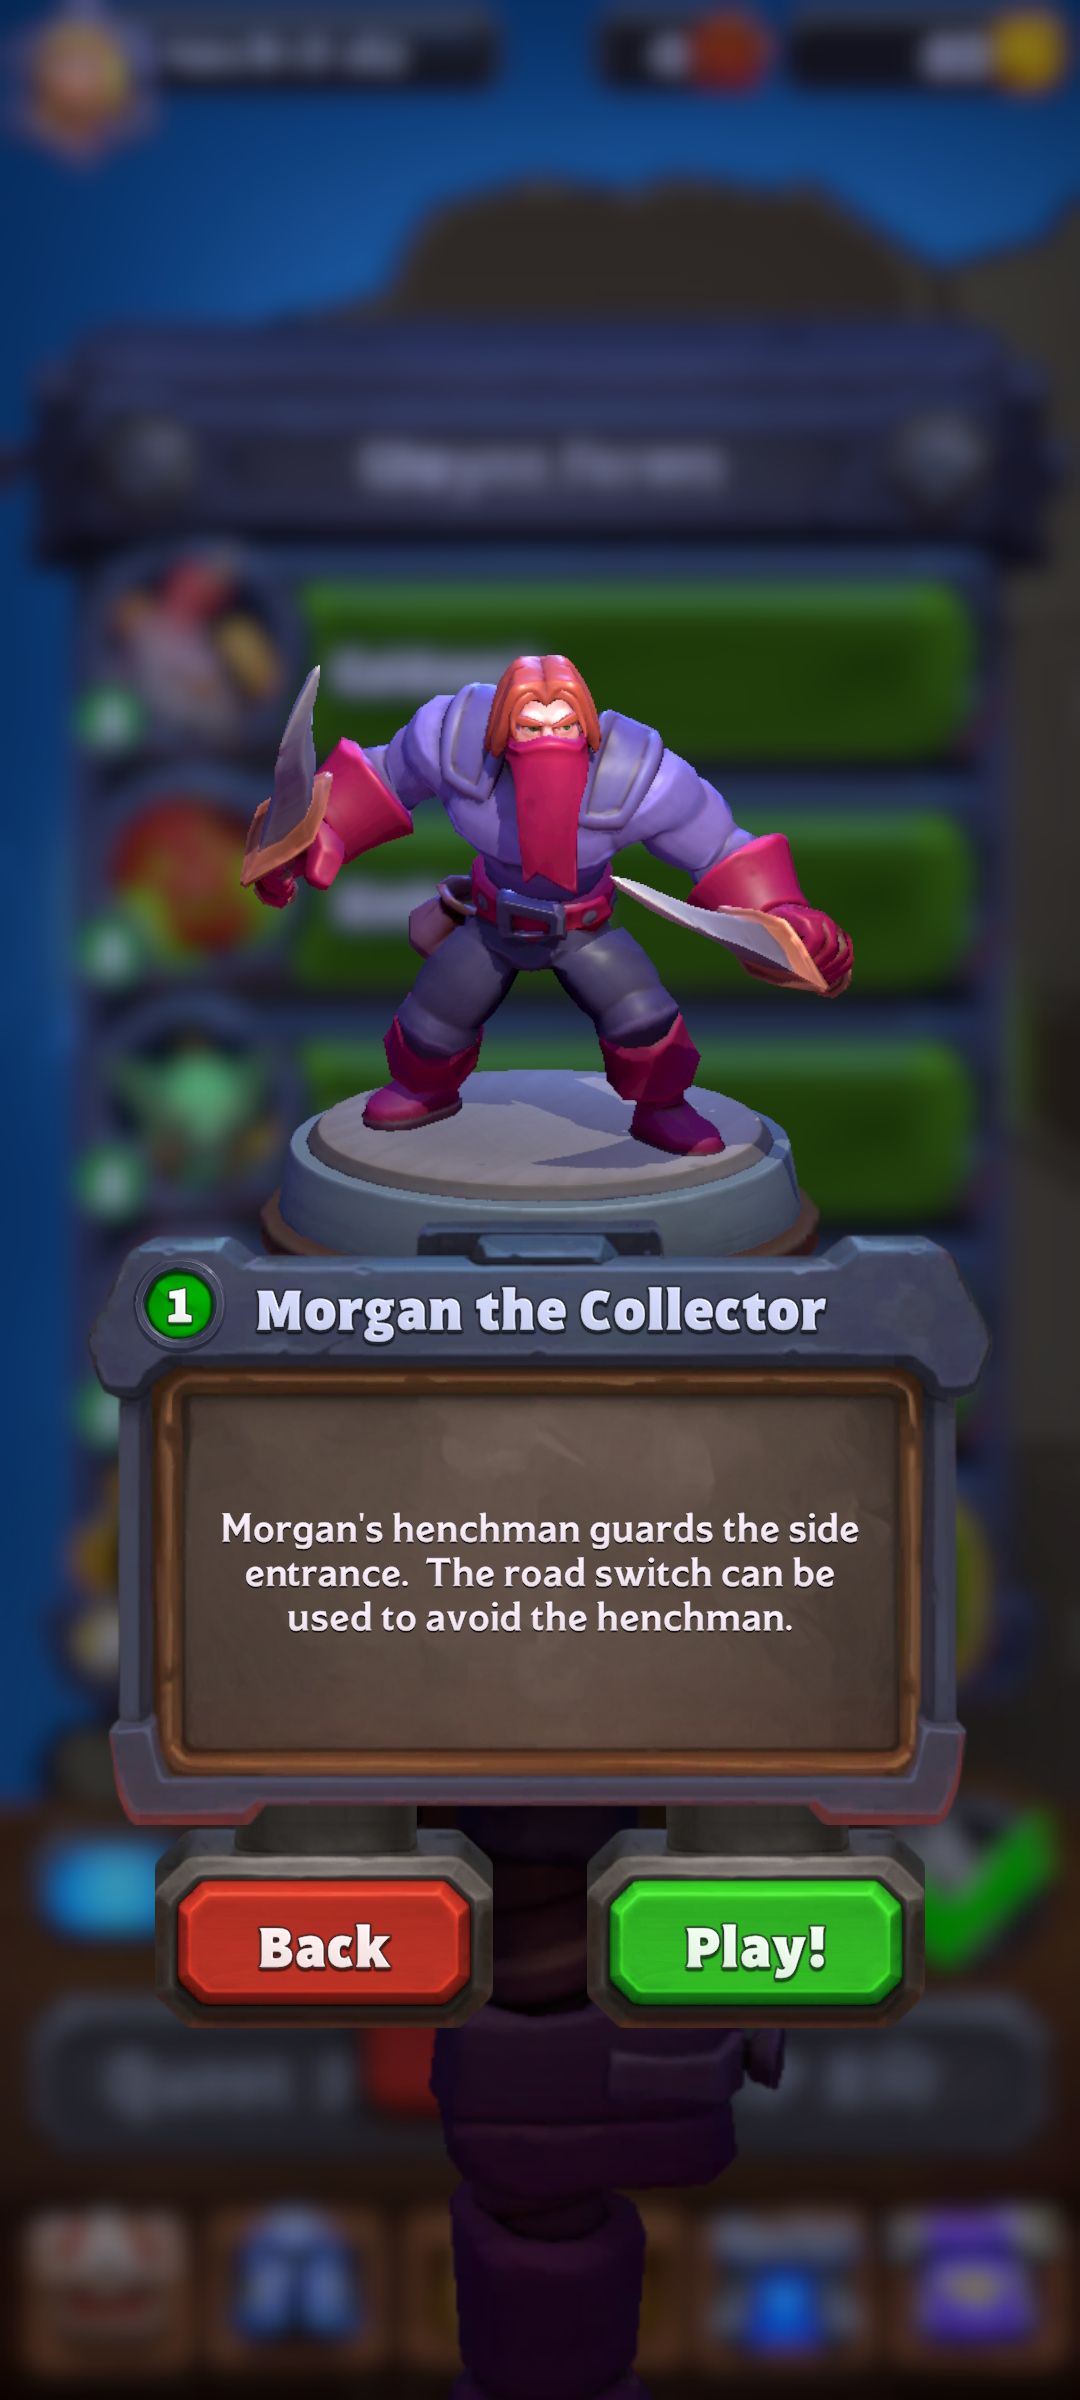 Morgan the Collector level hint with play and back button